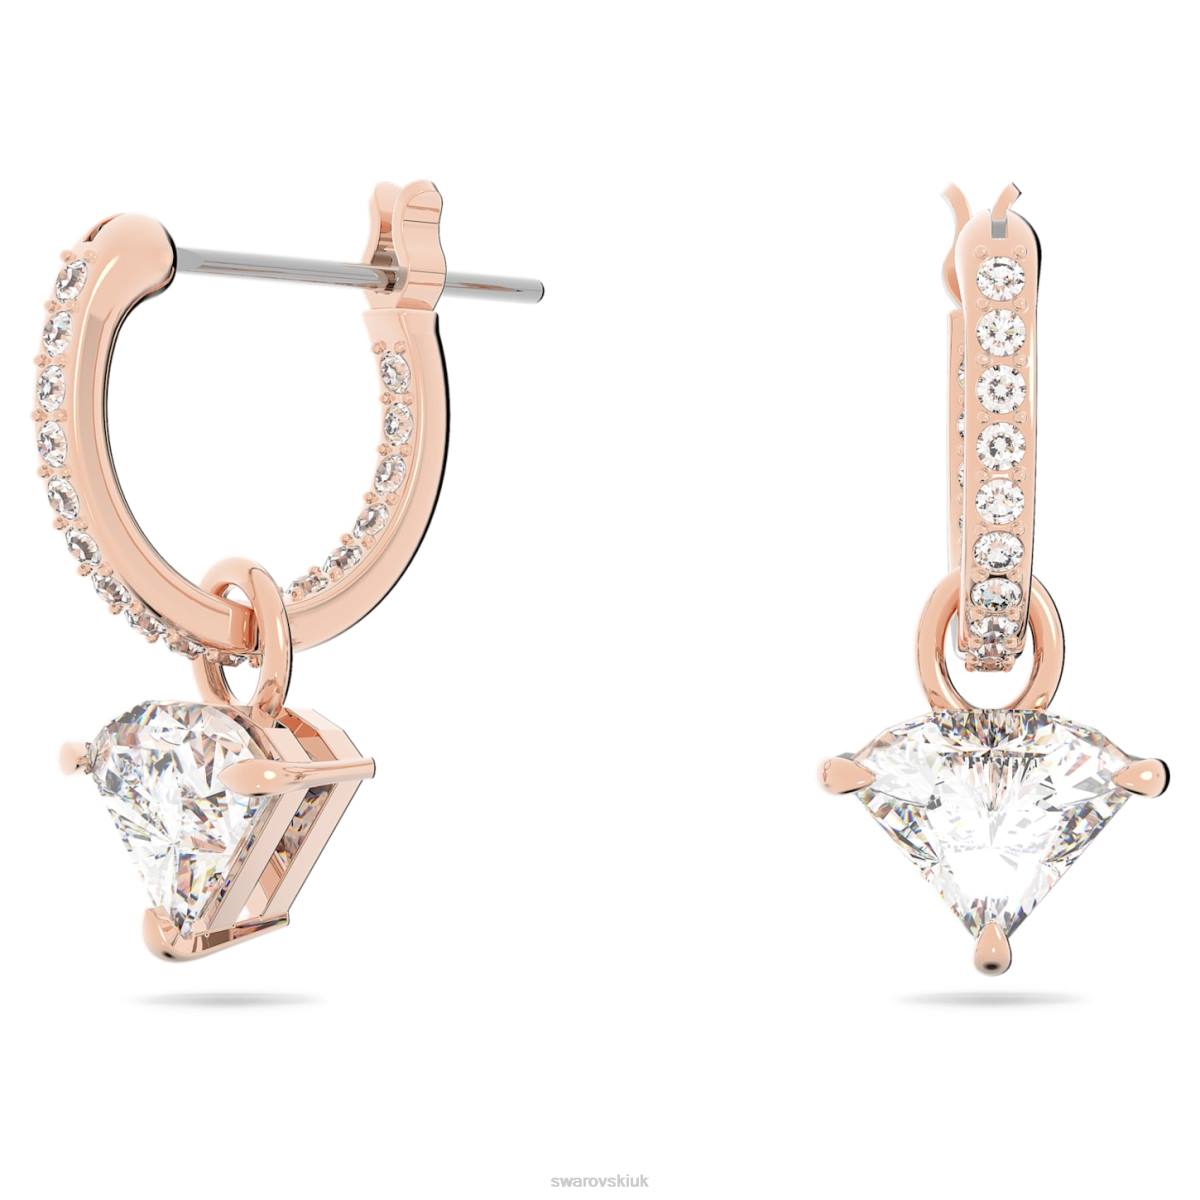 Jewelry Swarovski Ortyx drop earrings Triangle cut, White, Rose gold-tone plated 48JX791